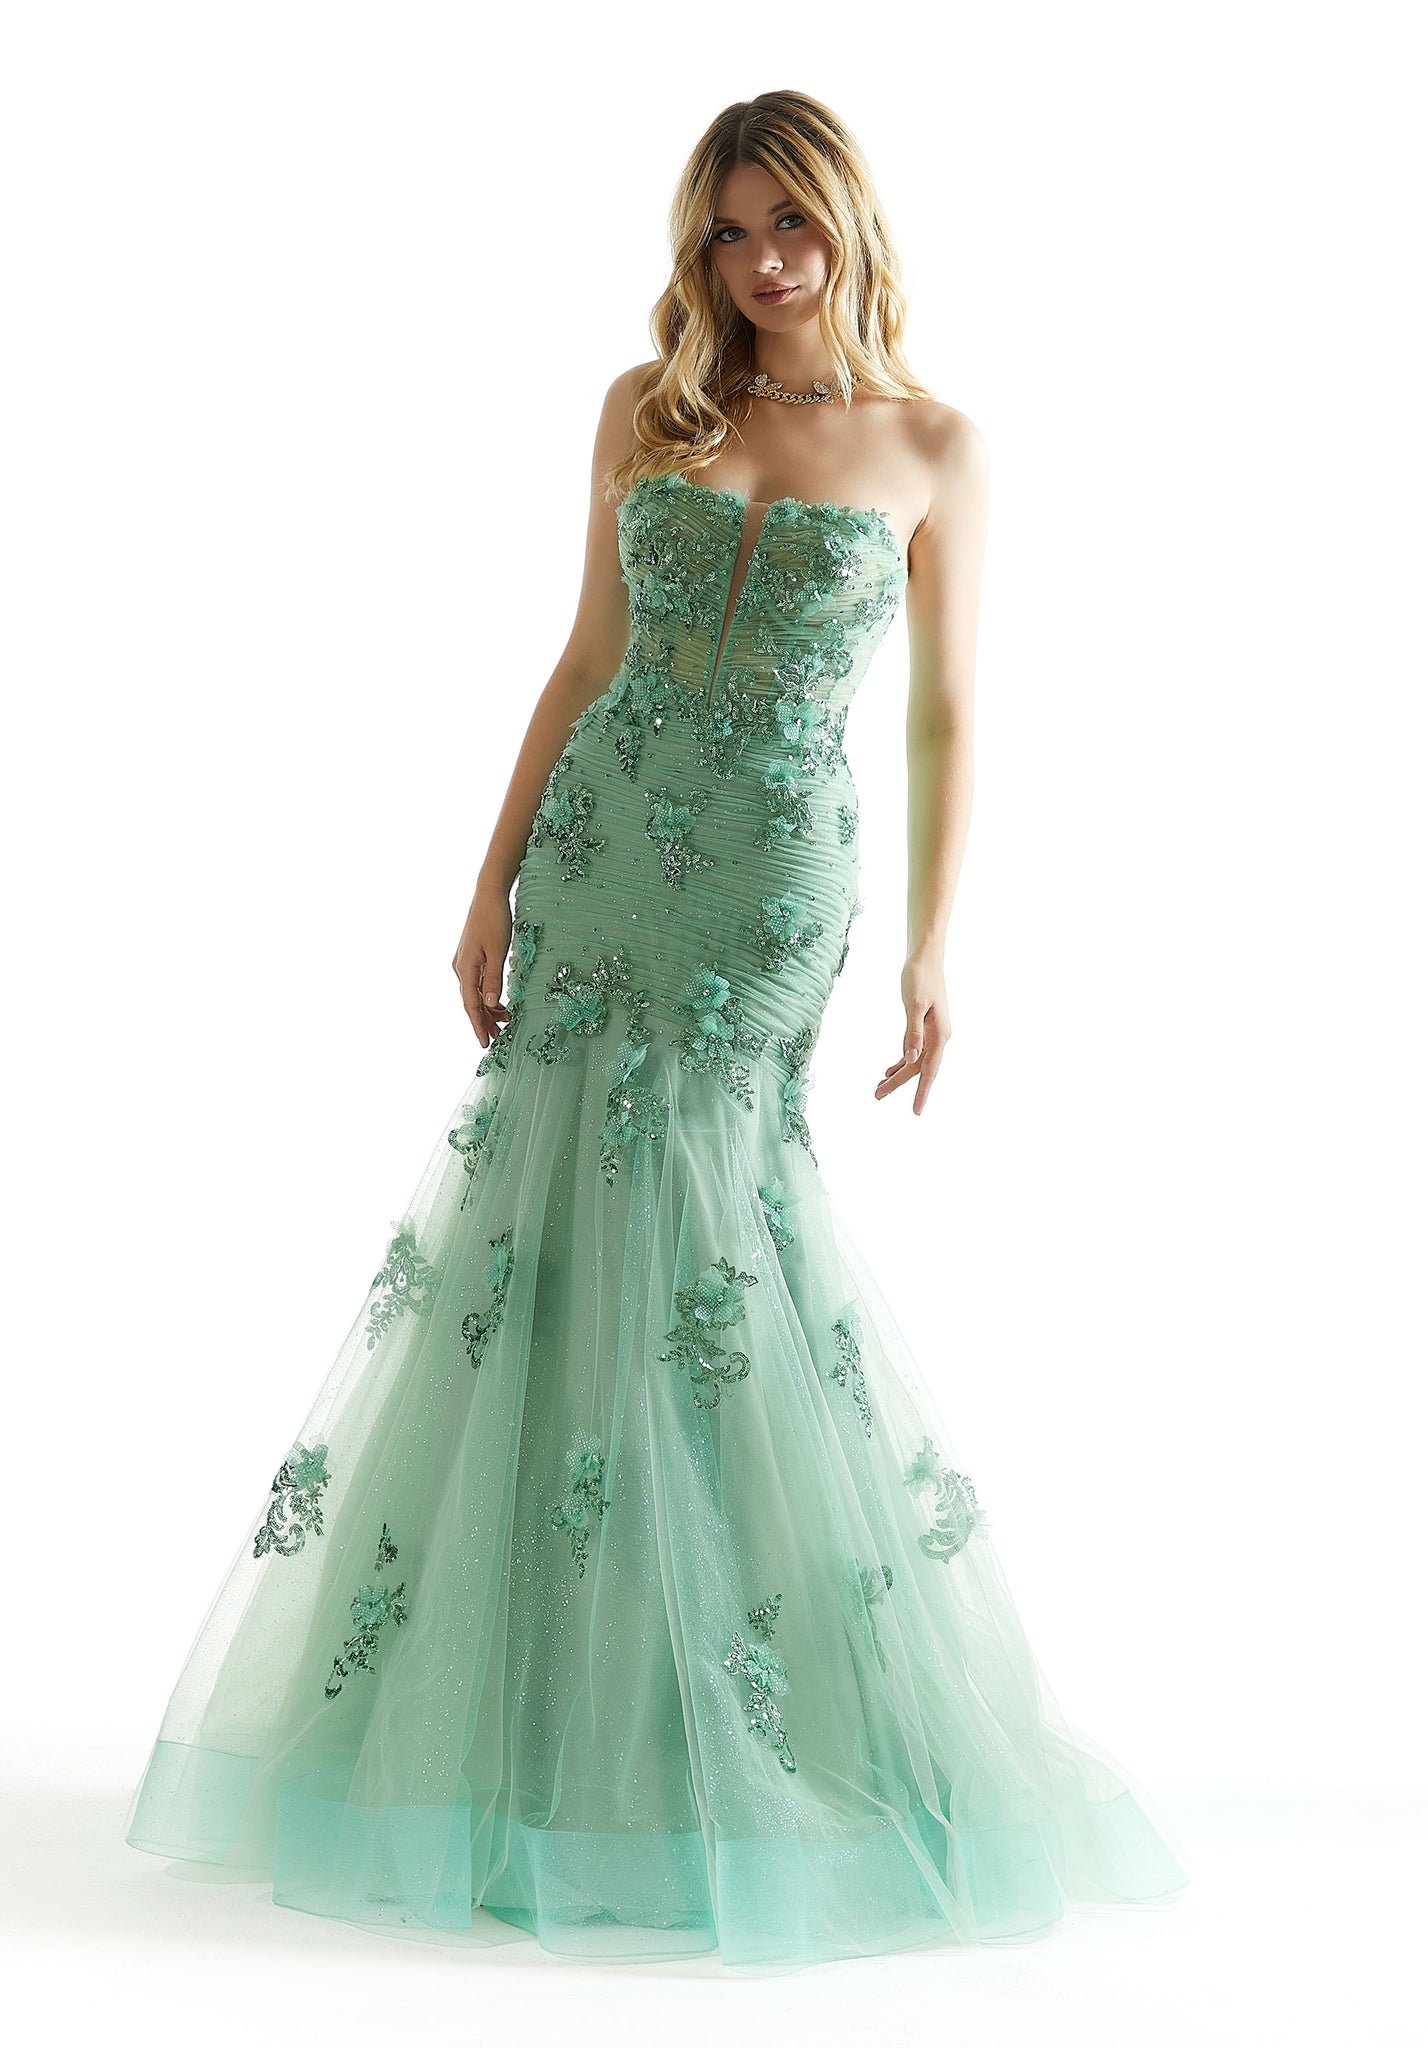 Feel like you just step foot of the red carpet in this fabulous long dress by Morilee, style 49008. Featuring a fitted mermaid silhouette with a strapless scoop neckline. This number is adorned with glistening beadwork and dazzling applique. A corset lace up back is sure to hug the waist gorgeously and give you that hour glass figure.